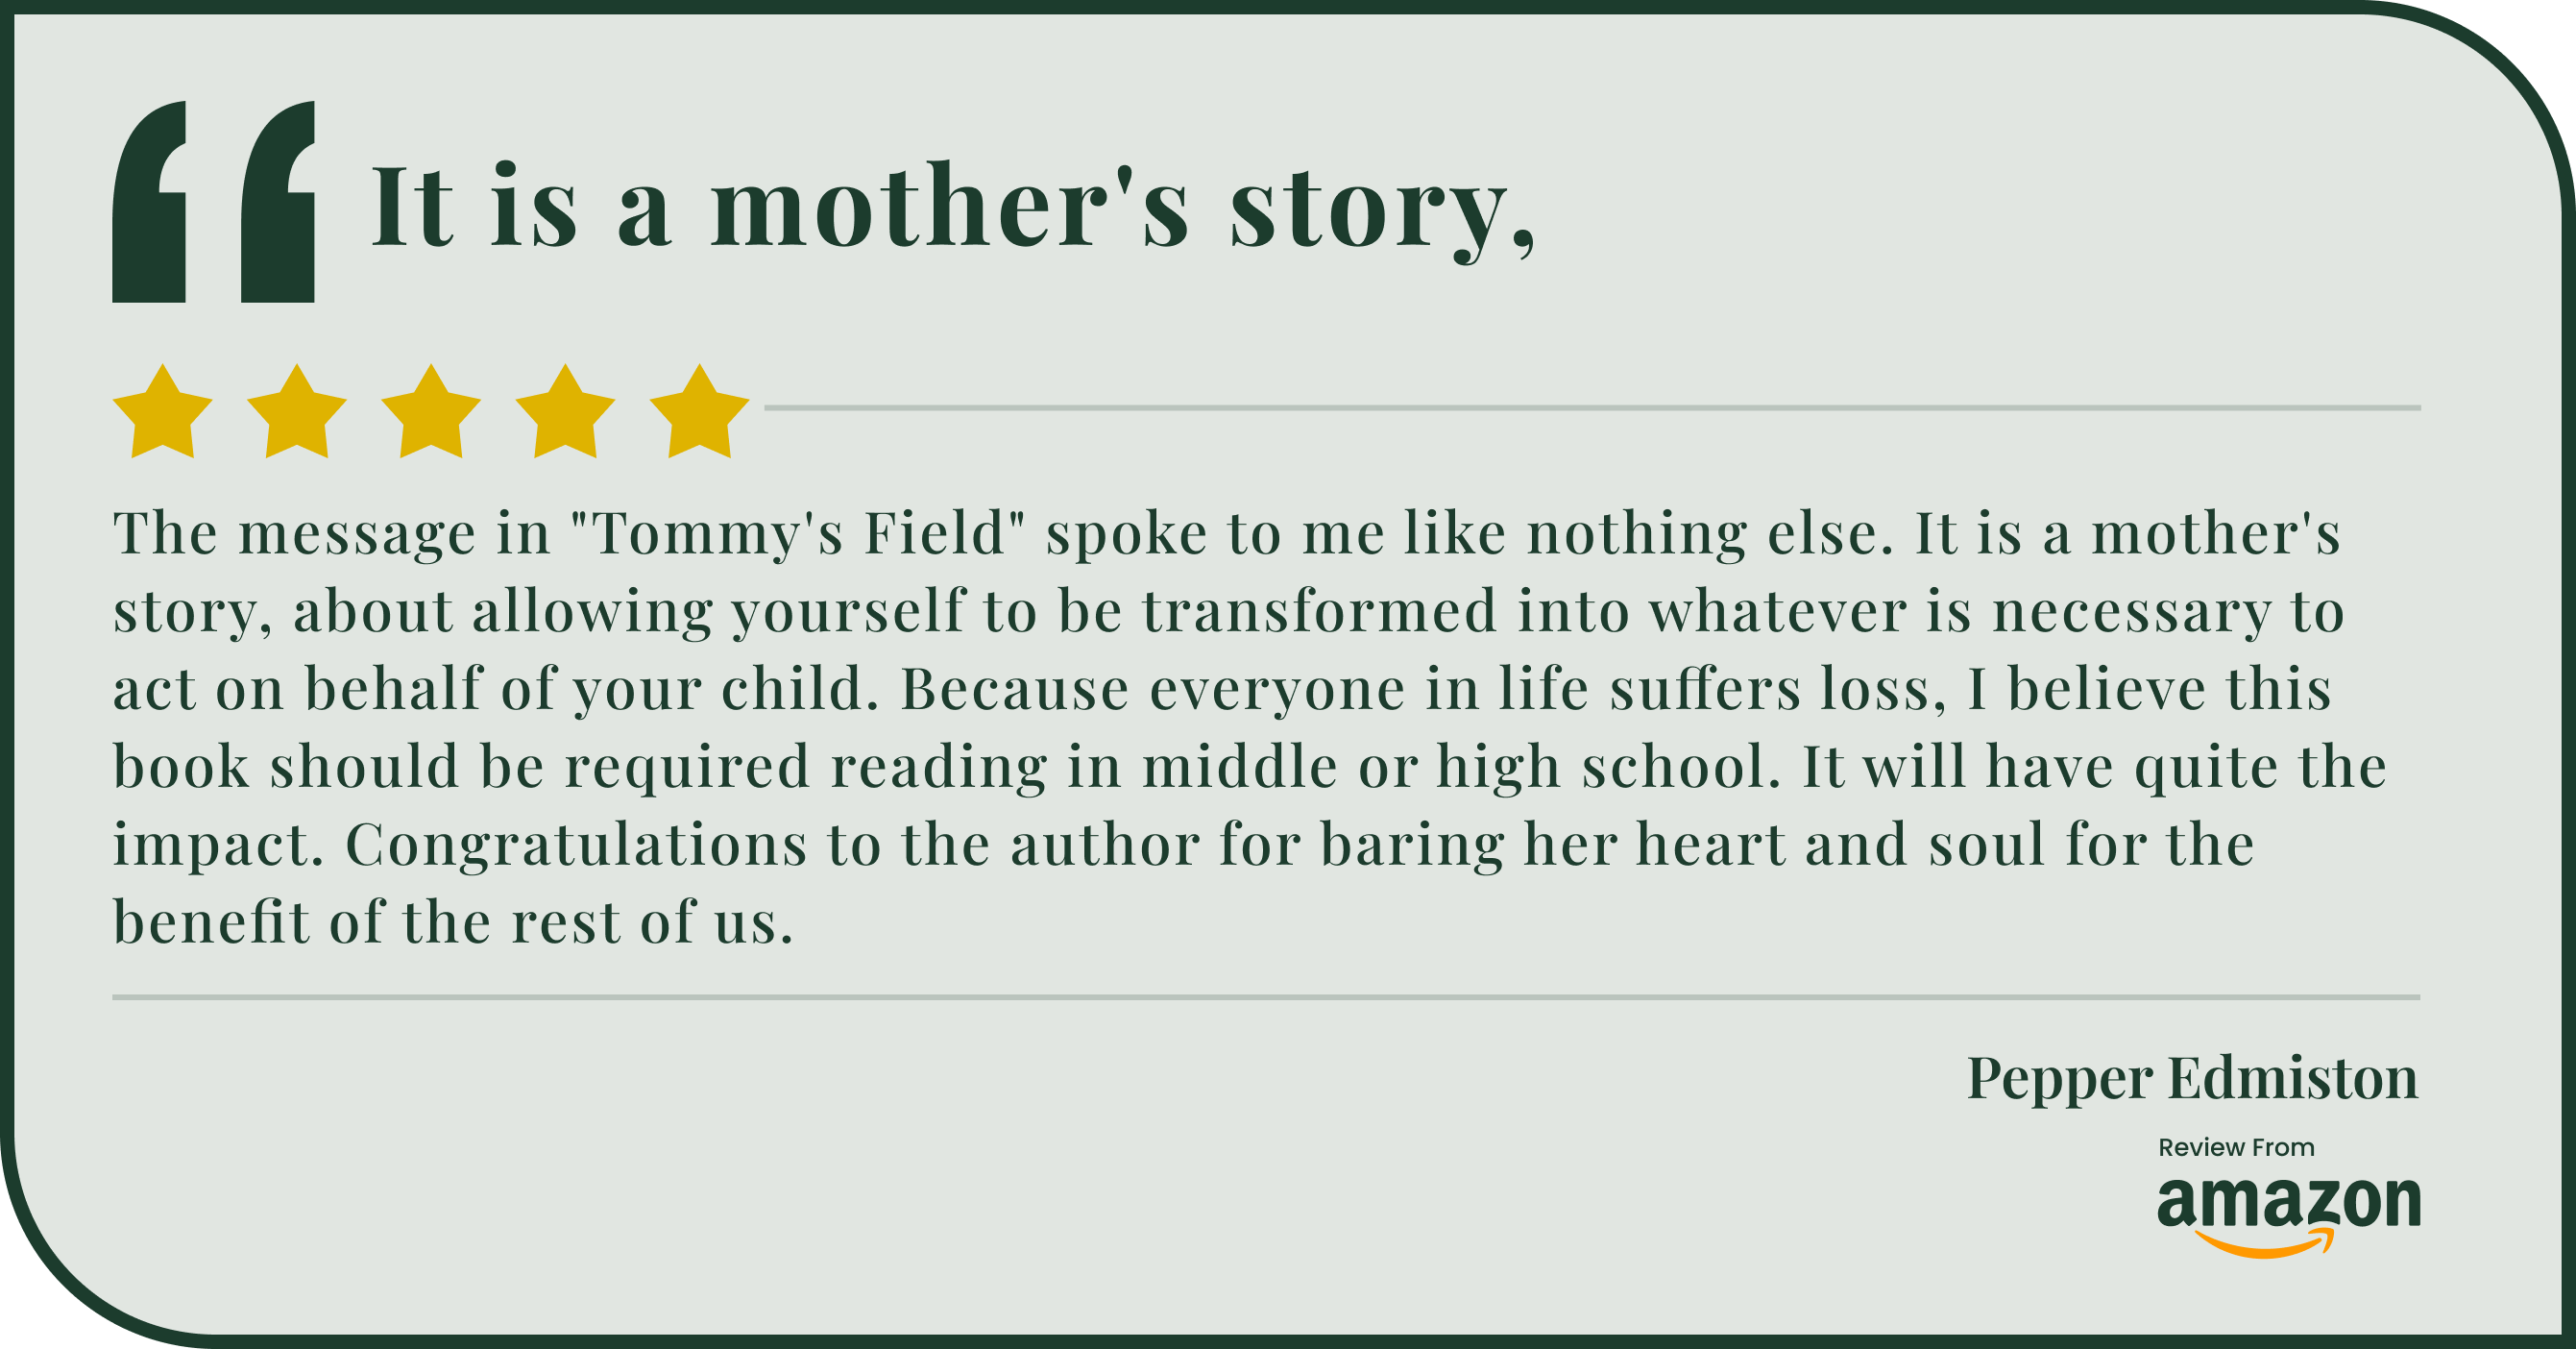 Five-star review of a mother's transformational story book.